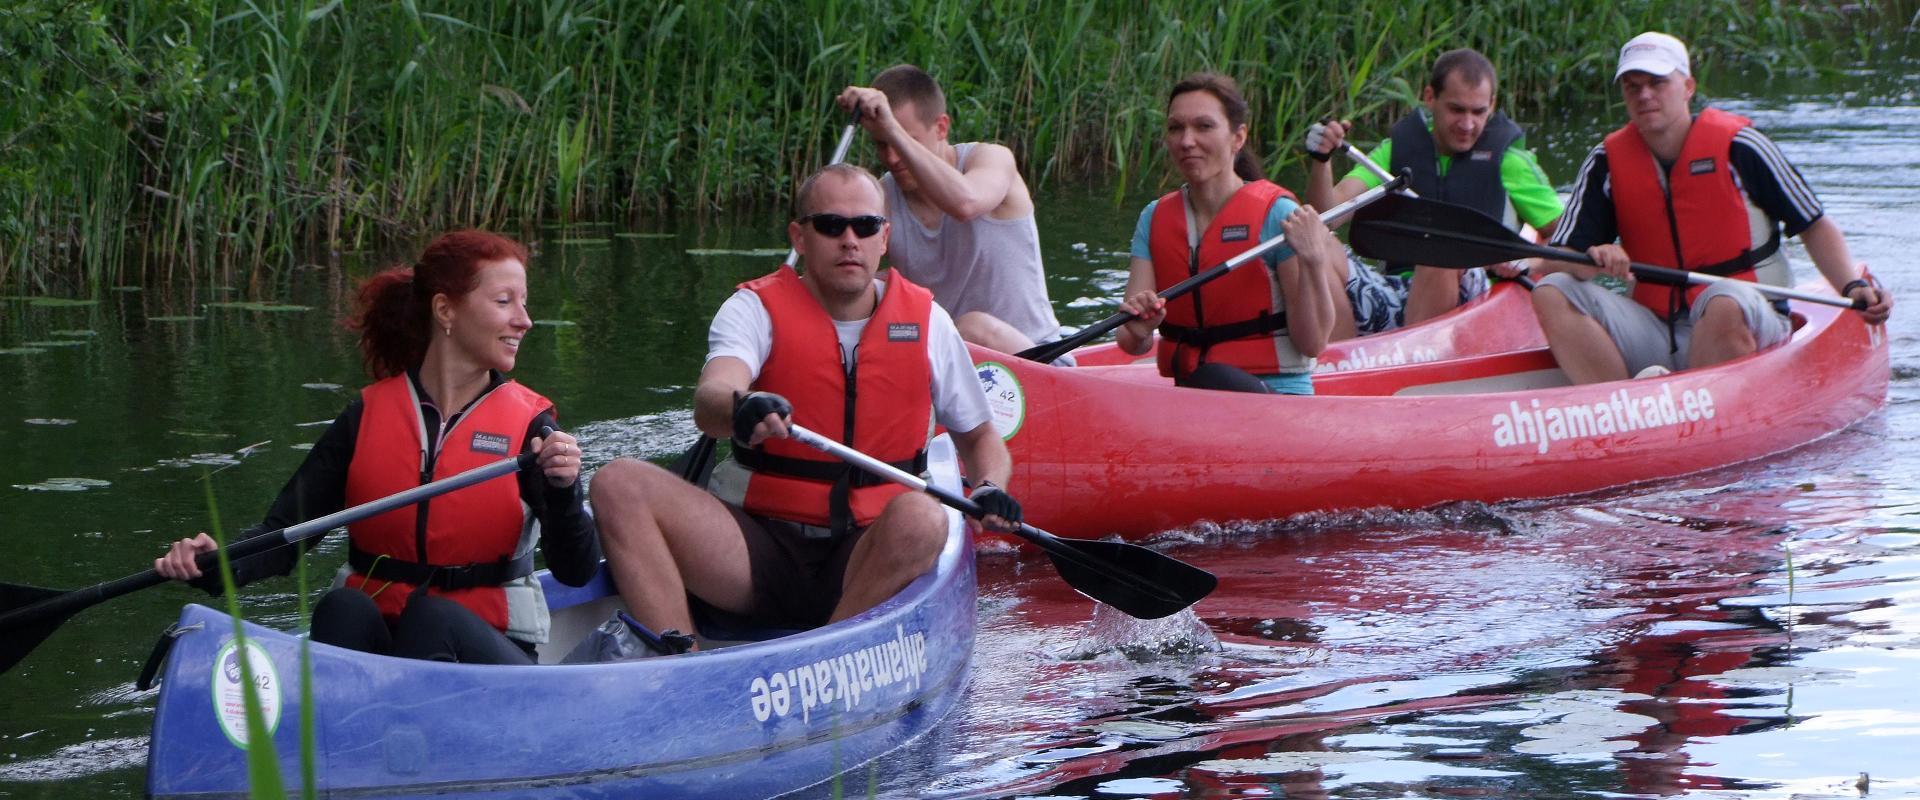 On a canoe in the "jungle" of the River Kõpu